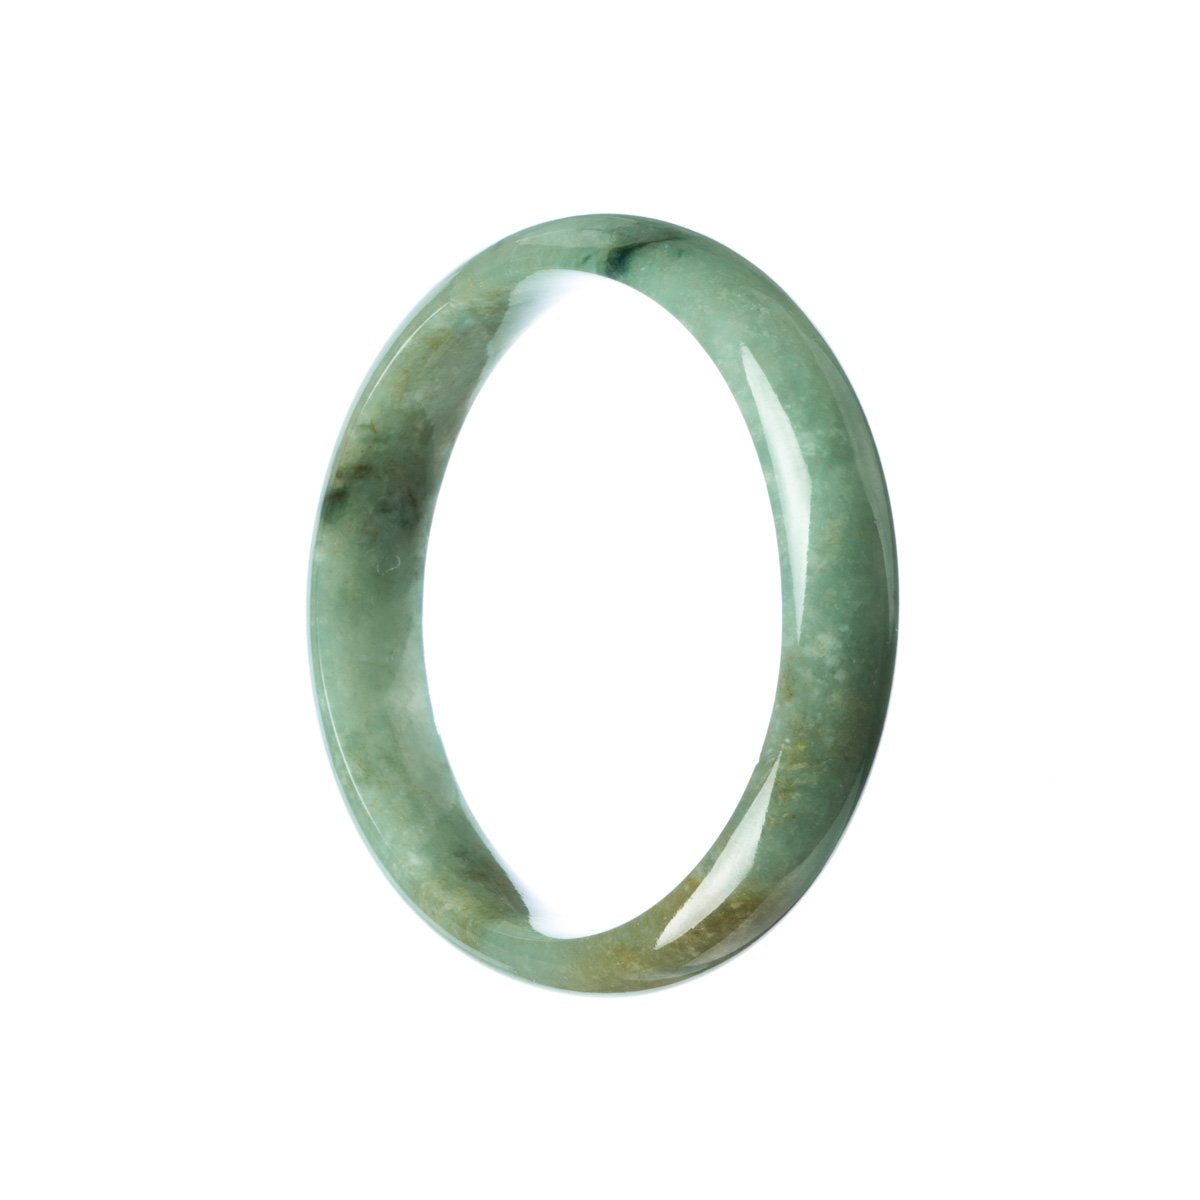 A close-up image of a beautiful green jadeite jade bangle bracelet with a half moon shape, measuring 57mm in size. The bracelet is certified as Grade A quality, showcasing its exceptional craftsmanship and stunning color. The brand name "MAYS" is engraved on the inner side of the bracelet.